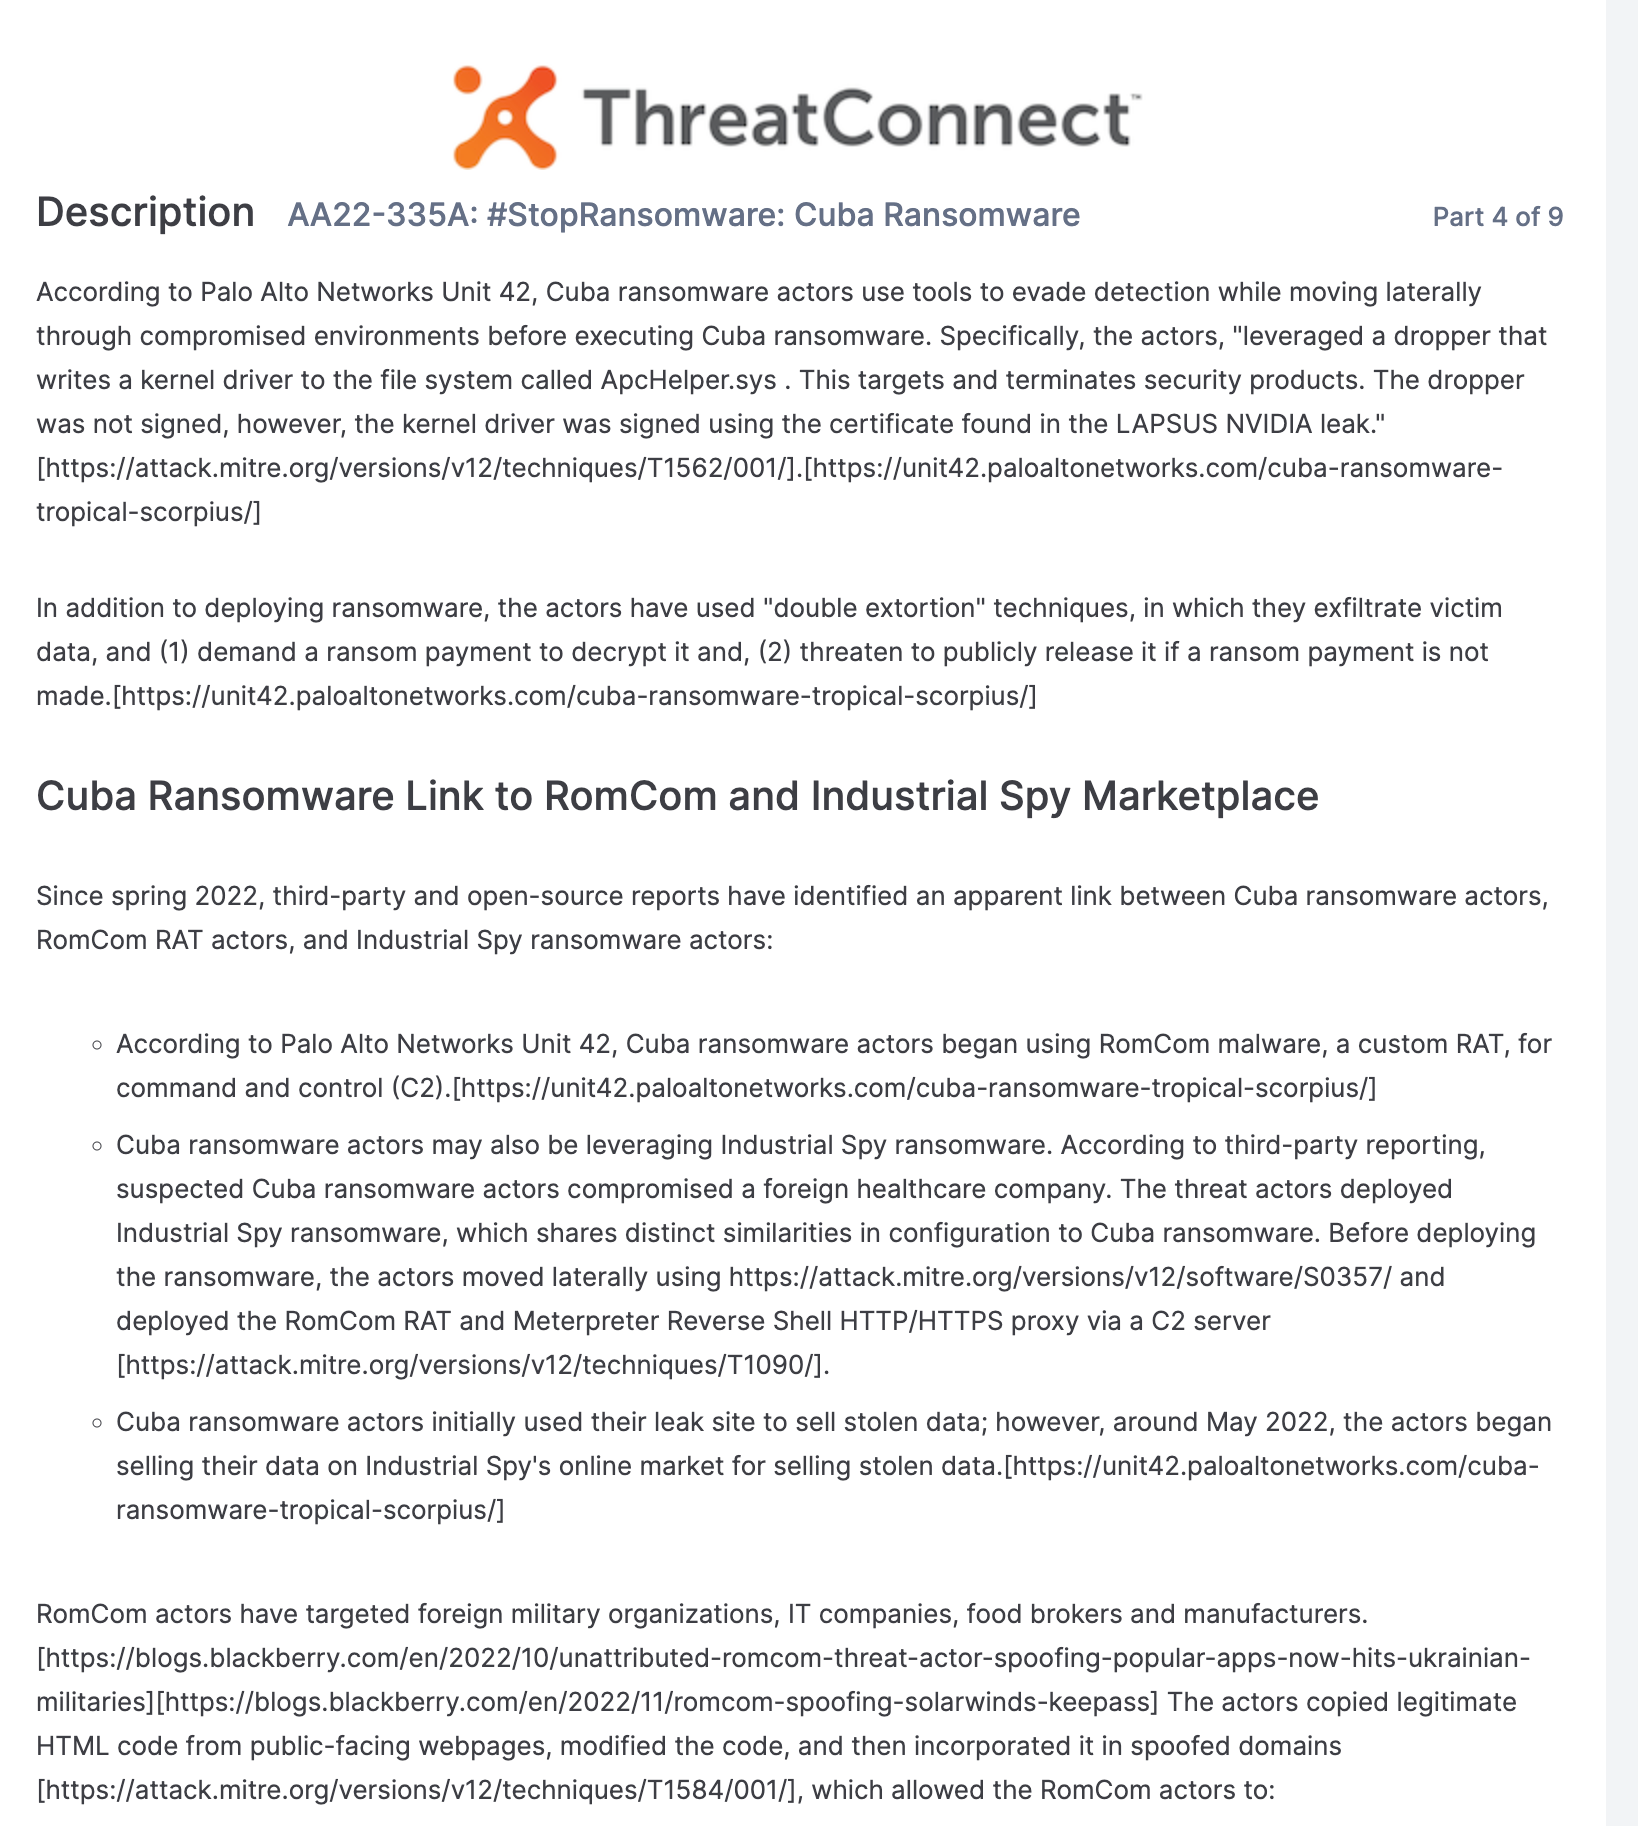 save and view reports from the ThreatConnect platform